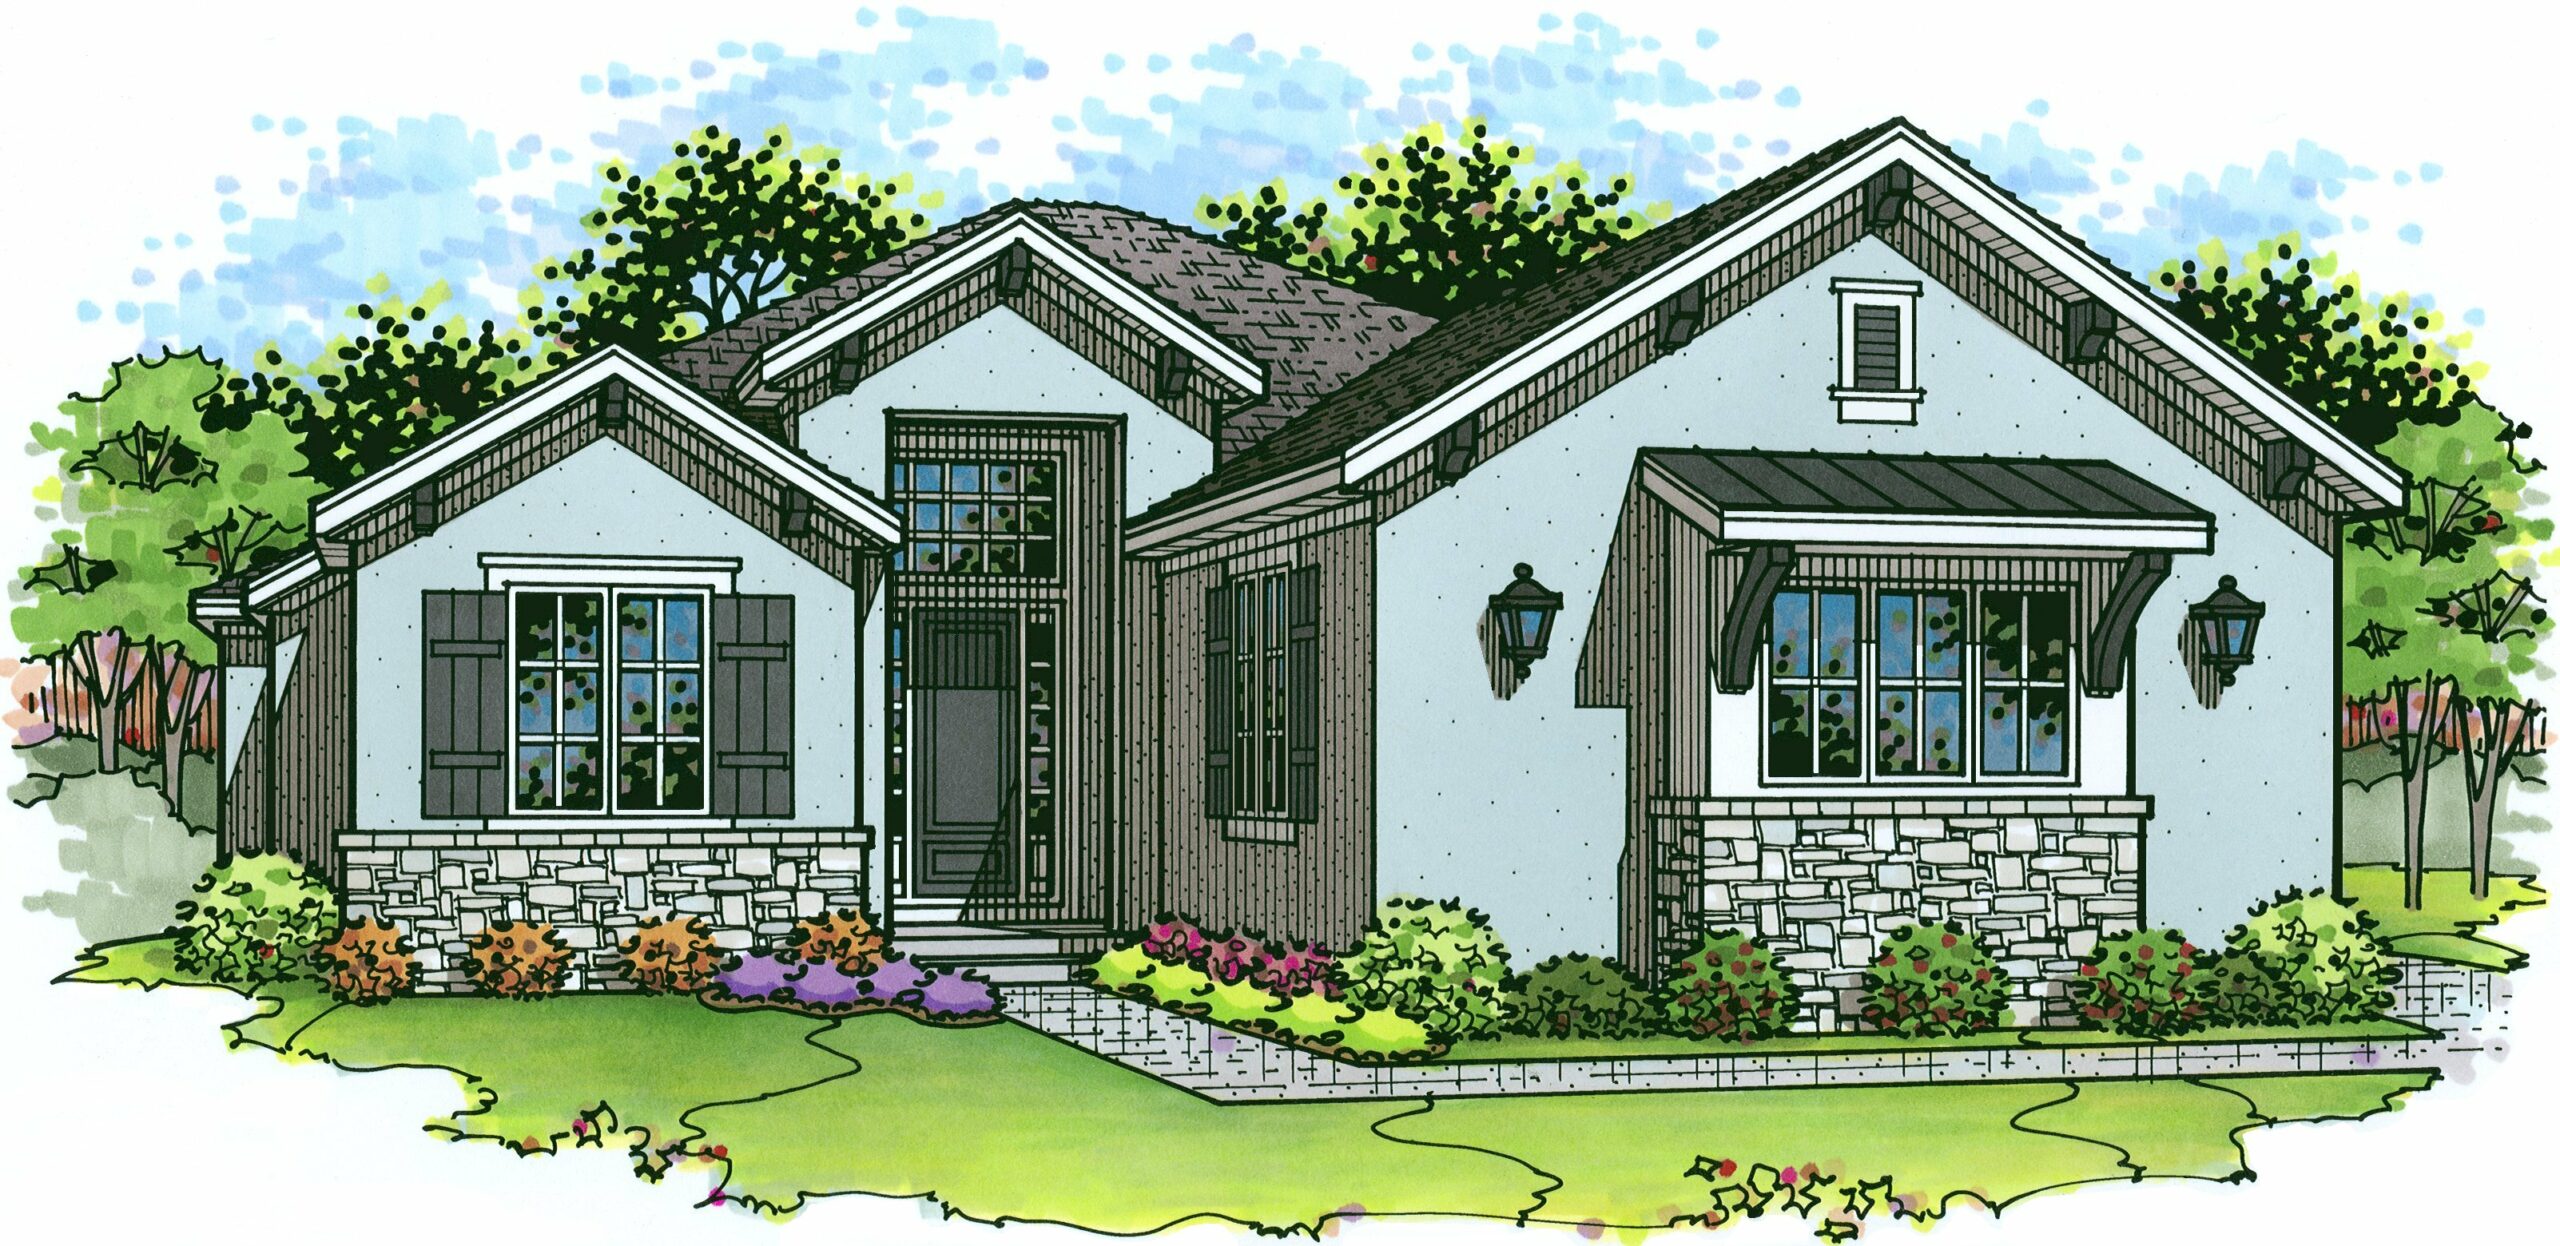 Rendering of the front elevation of the Norway model from Lambie Homes